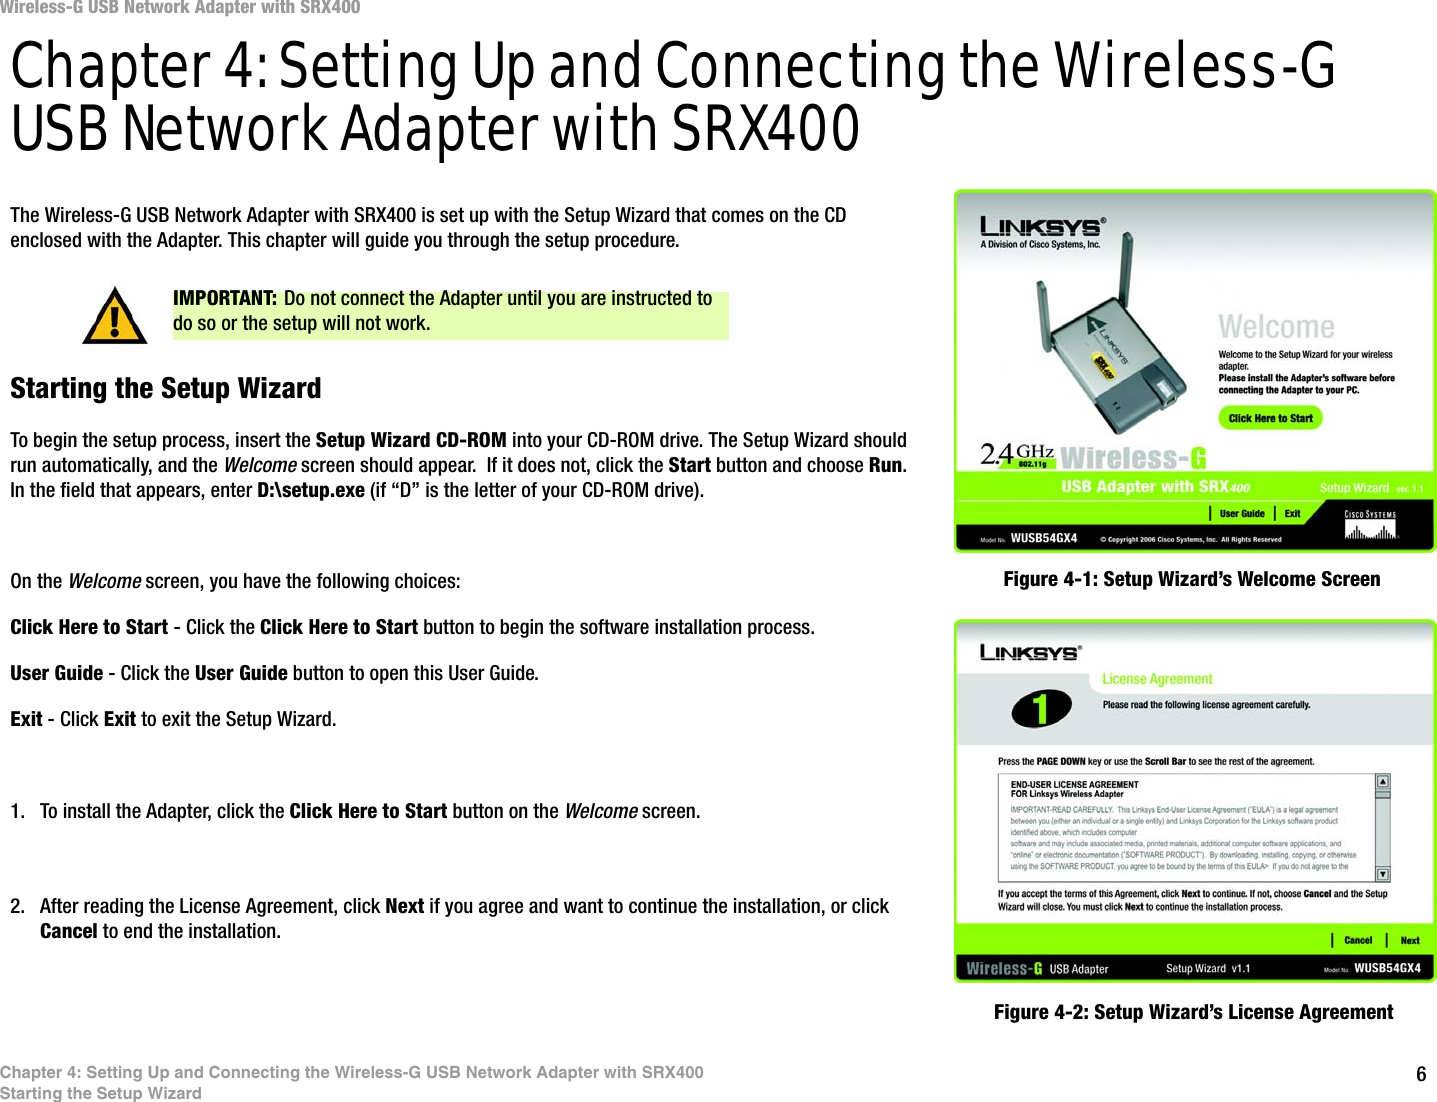 6Chapter 4: Setting Up and Connecting the Wireless-G USB Network Adapter with SRX400Starting the Setup WizardWireless-G USB Network Adapter with SRX400Chapter 4: Setting Up and Connecting the Wireless-G USB Network Adapter with SRX400The Wireless-G USB Network Adapter with SRX400 is set up with the Setup Wizard that comes on the CD enclosed with the Adapter. This chapter will guide you through the setup procedure. Starting the Setup WizardTo begin the setup process, insert the Setup Wizard CD-ROM into your CD-ROM drive. The Setup Wizard should run automatically, and the Welcome screen should appear.  If it does not, click the Start button and choose Run. In the field that appears, enter D:\setup.exe (if “D” is the letter of your CD-ROM drive). On the Welcome screen, you have the following choices:Click Here to Start - Click the Click Here to Start button to begin the software installation process. User Guide - Click the User Guide button to open this User Guide. Exit - Click Exit to exit the Setup Wizard.1. To install the Adapter, click the Click Here to Start button on the Welcome screen.2. After reading the License Agreement, click Next if you agree and want to continue the installation, or click Cancel to end the installation.Figure 4-1: Setup Wizard’s Welcome ScreenFigure 4-2: Setup Wizard’s License AgreementIMPORTANT: Do not connect the Adapter until you are instructed to do so or the setup will not work.